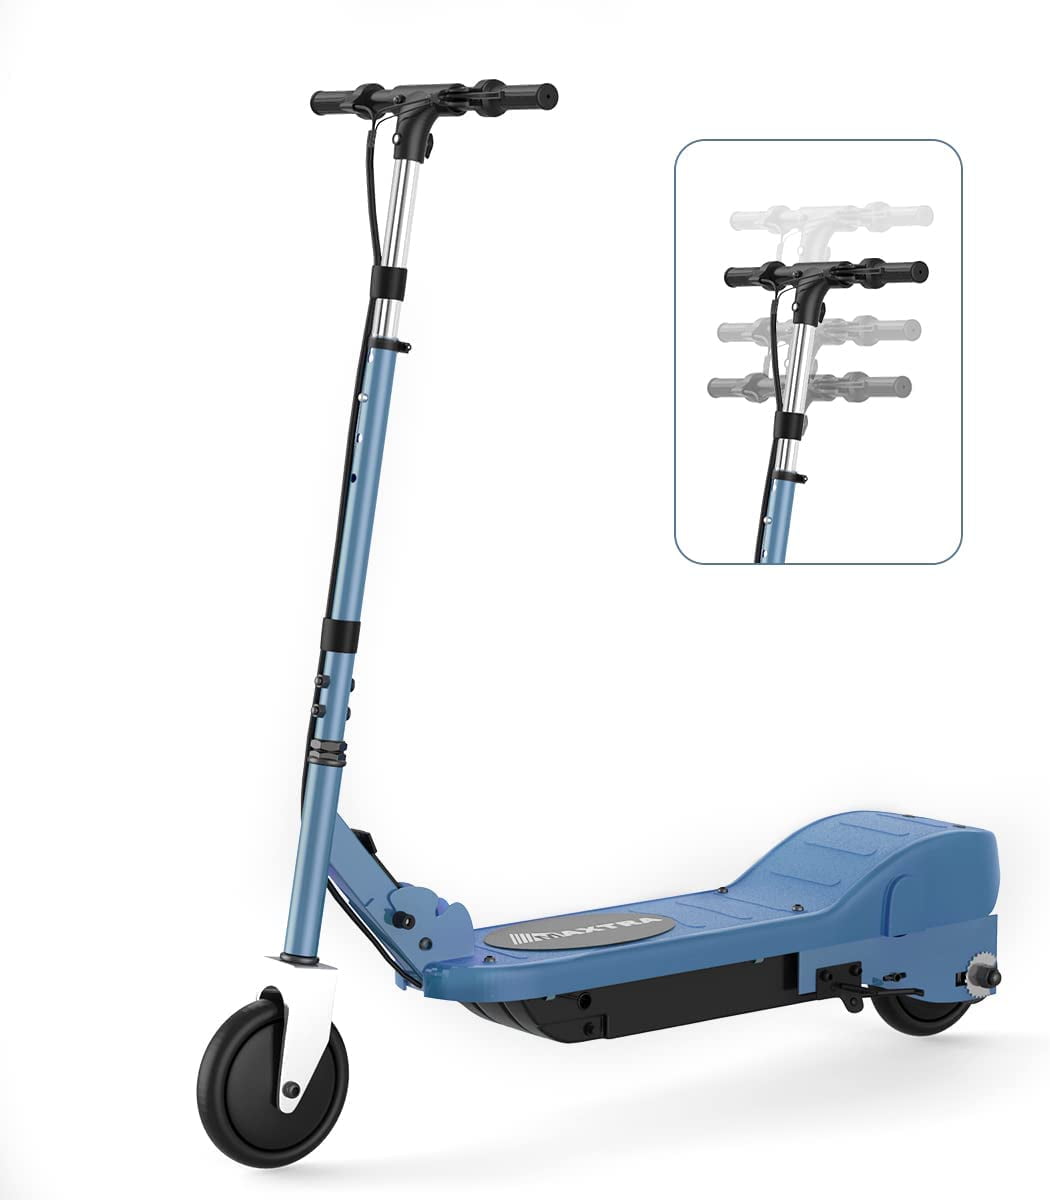 Ryd op skat visuel Maxtra Scooters E100 Electric Scooter for Kids Ages 6-12 - up to 10 Mph,  Foldable and Adjustable Handlebar - Walmart.com